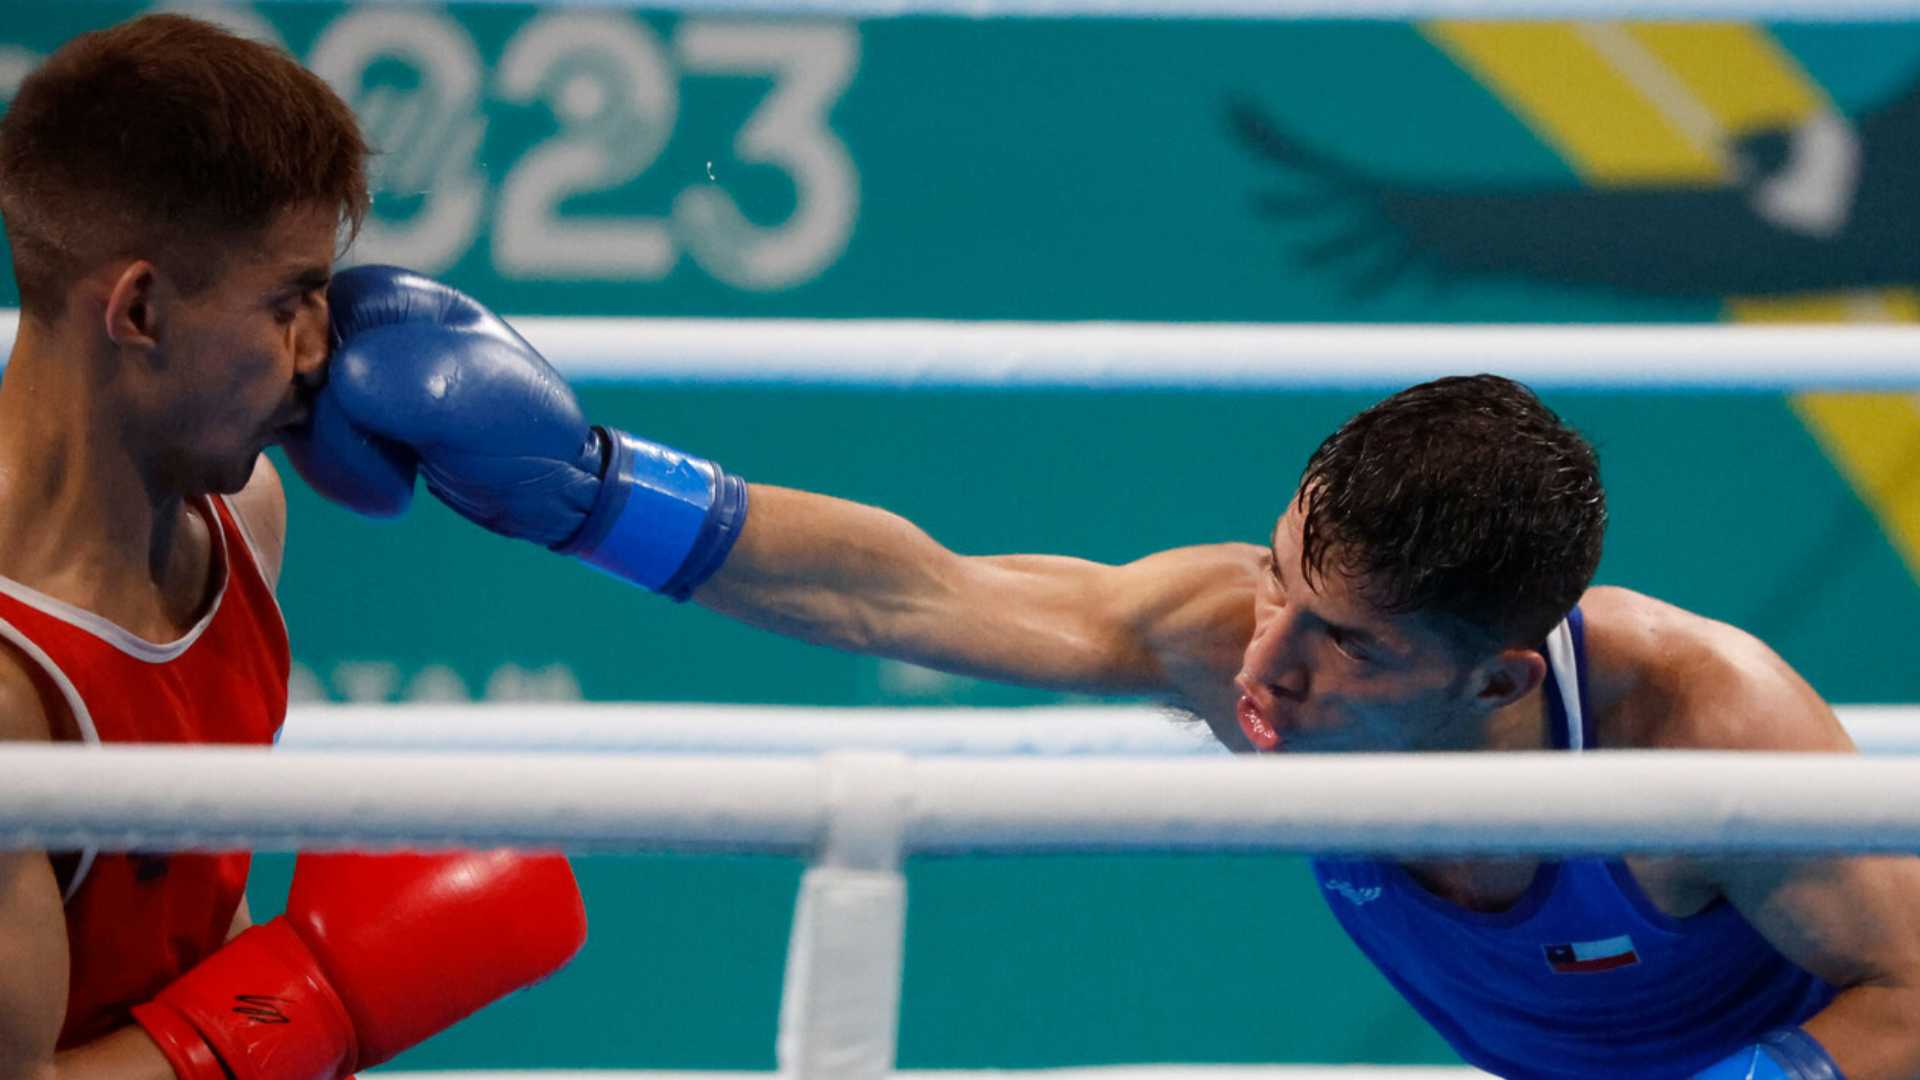 Chileans Kim-berly Sandoval and Héctor Tapia face defeat in Pan American boxing